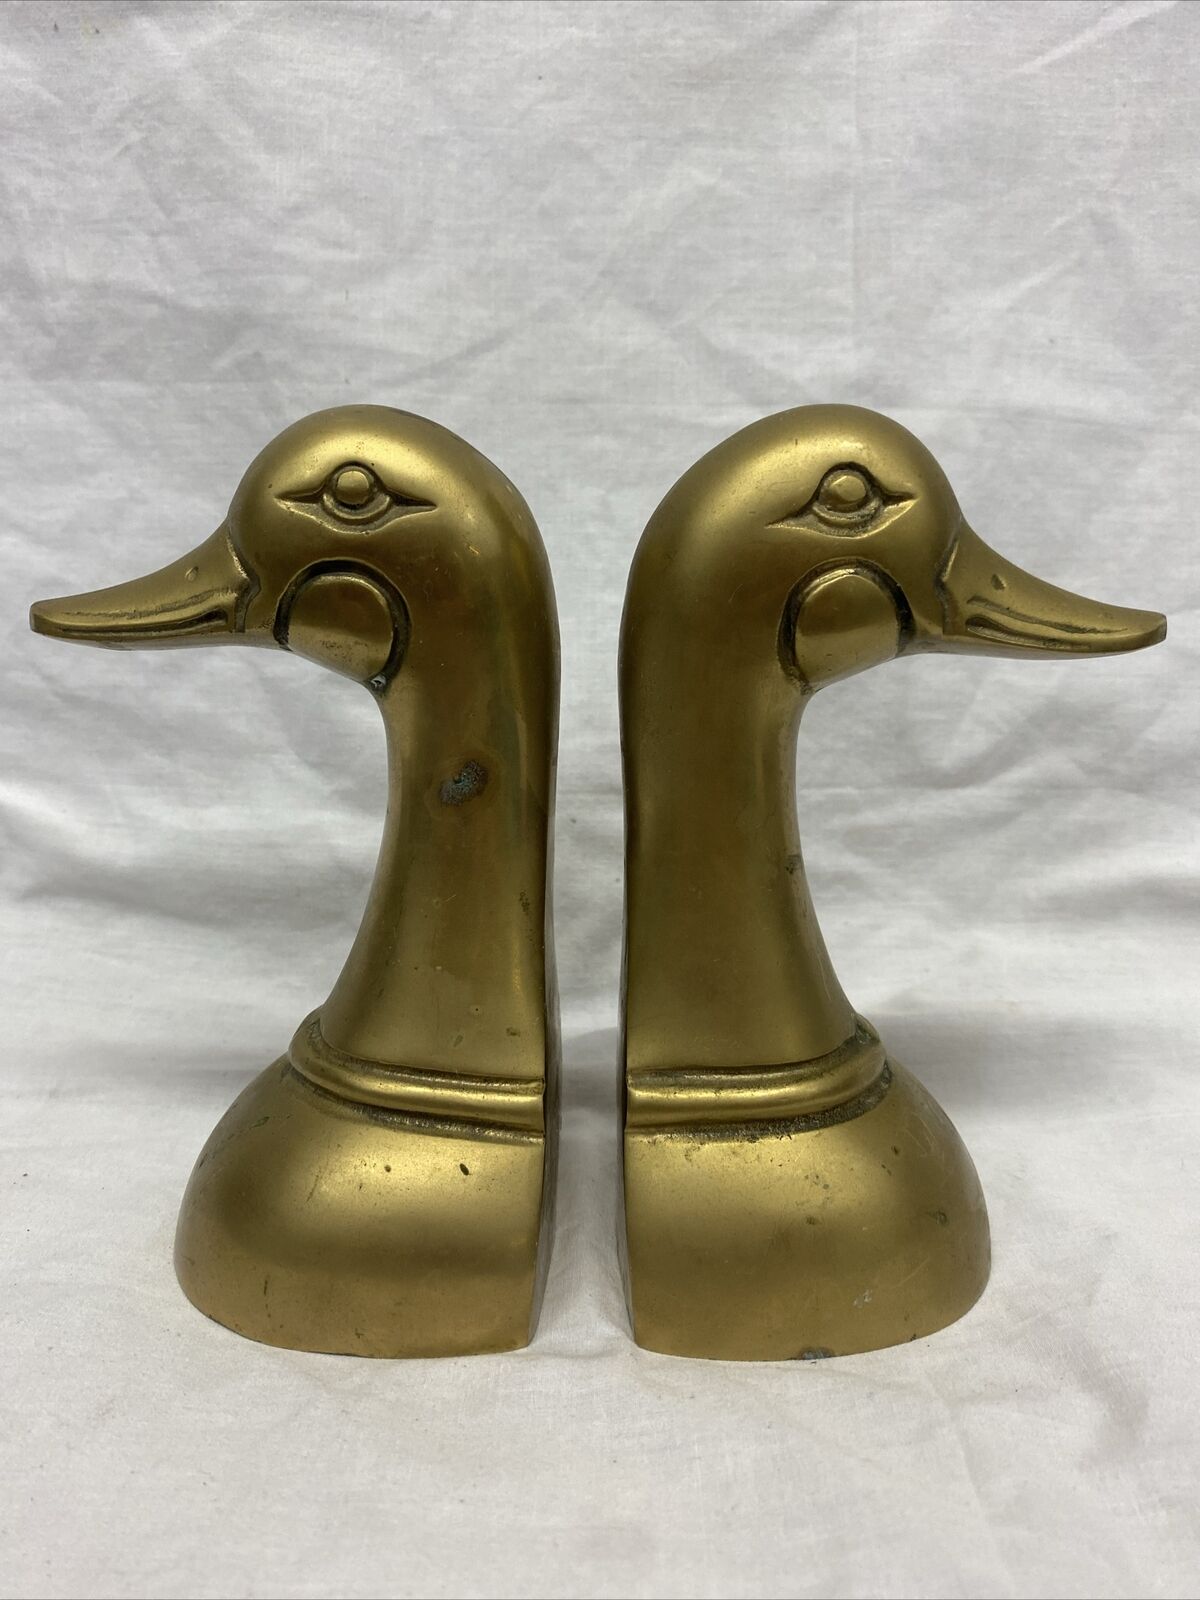 Rare Vintage Brass Duck Bookends Heavy Made In Taiwan